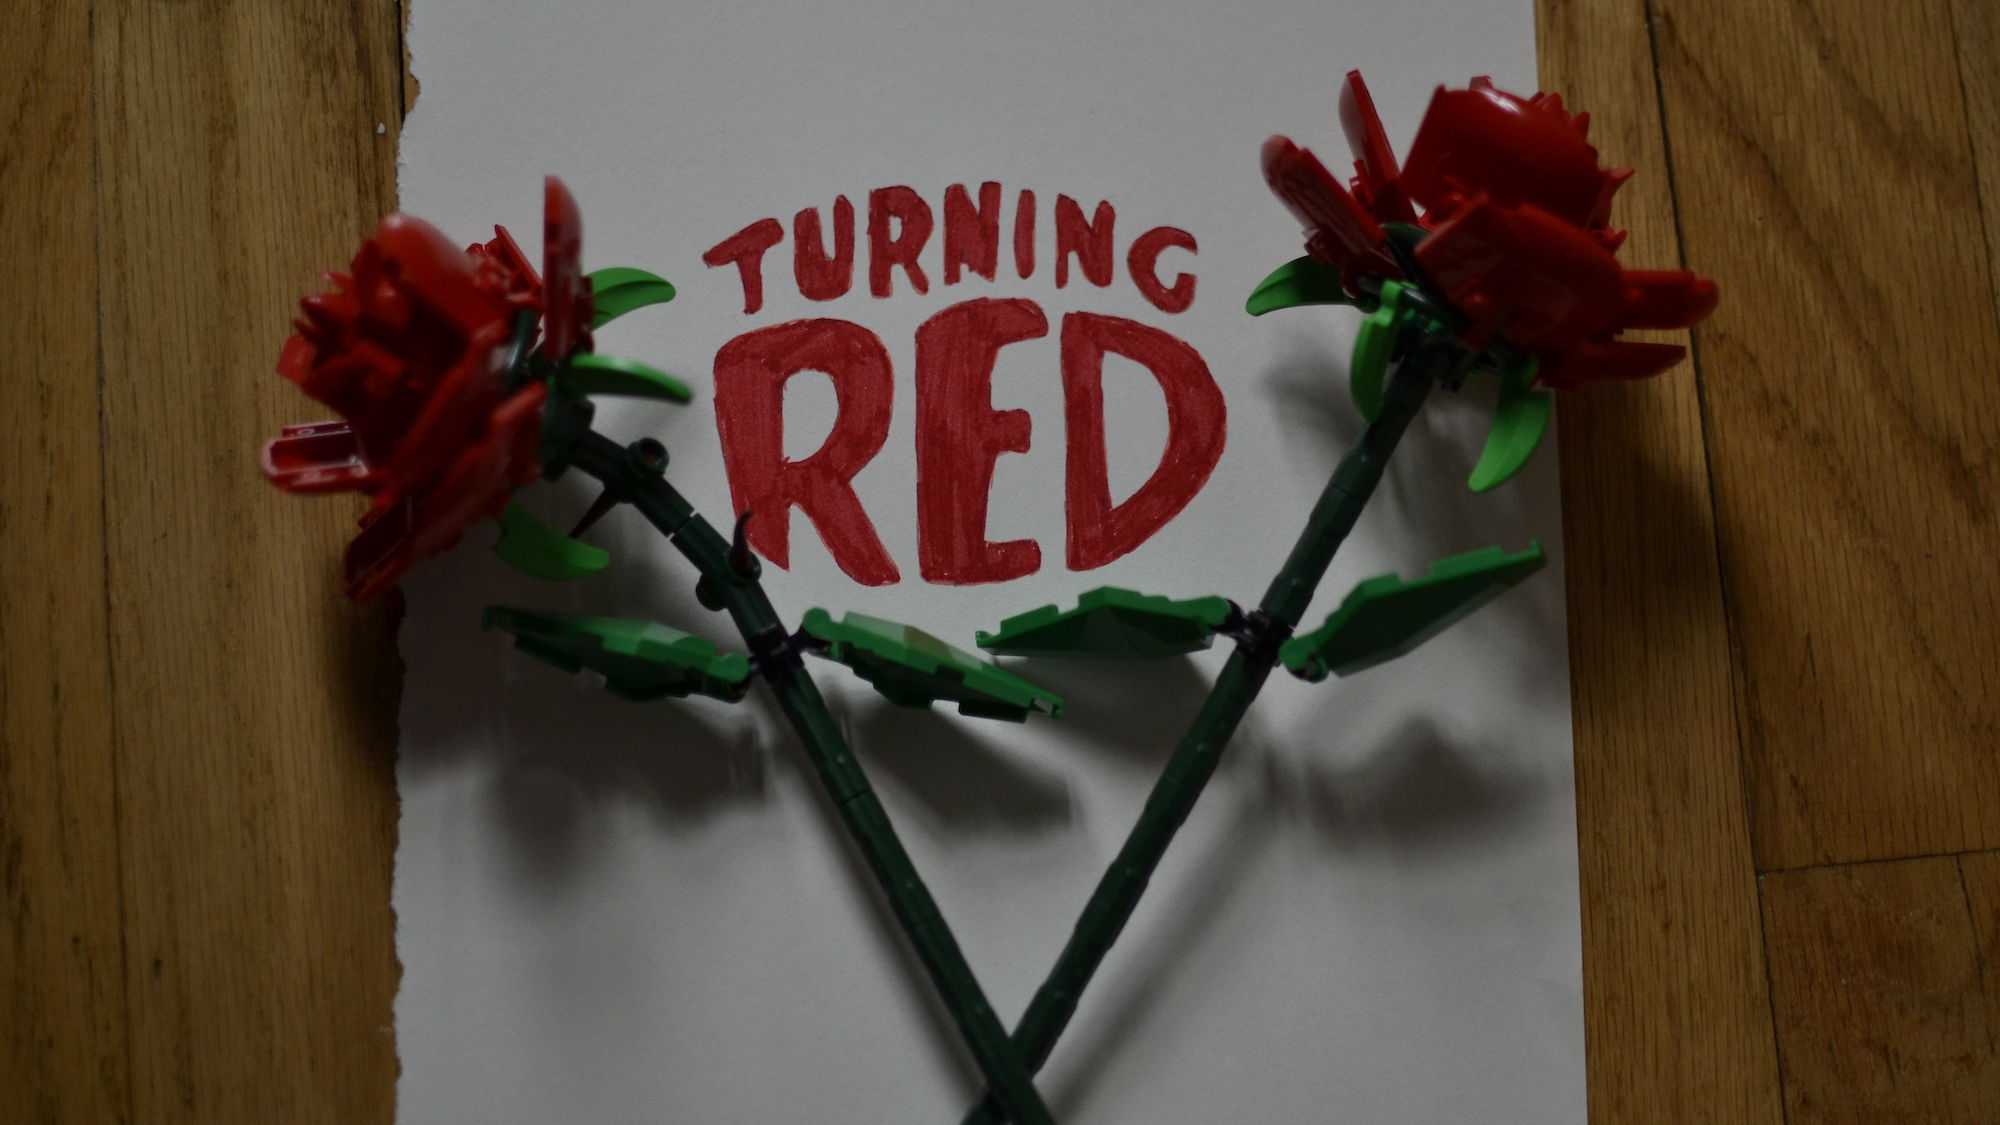 ‘Turning Red’ title card surrounded by lego roses.